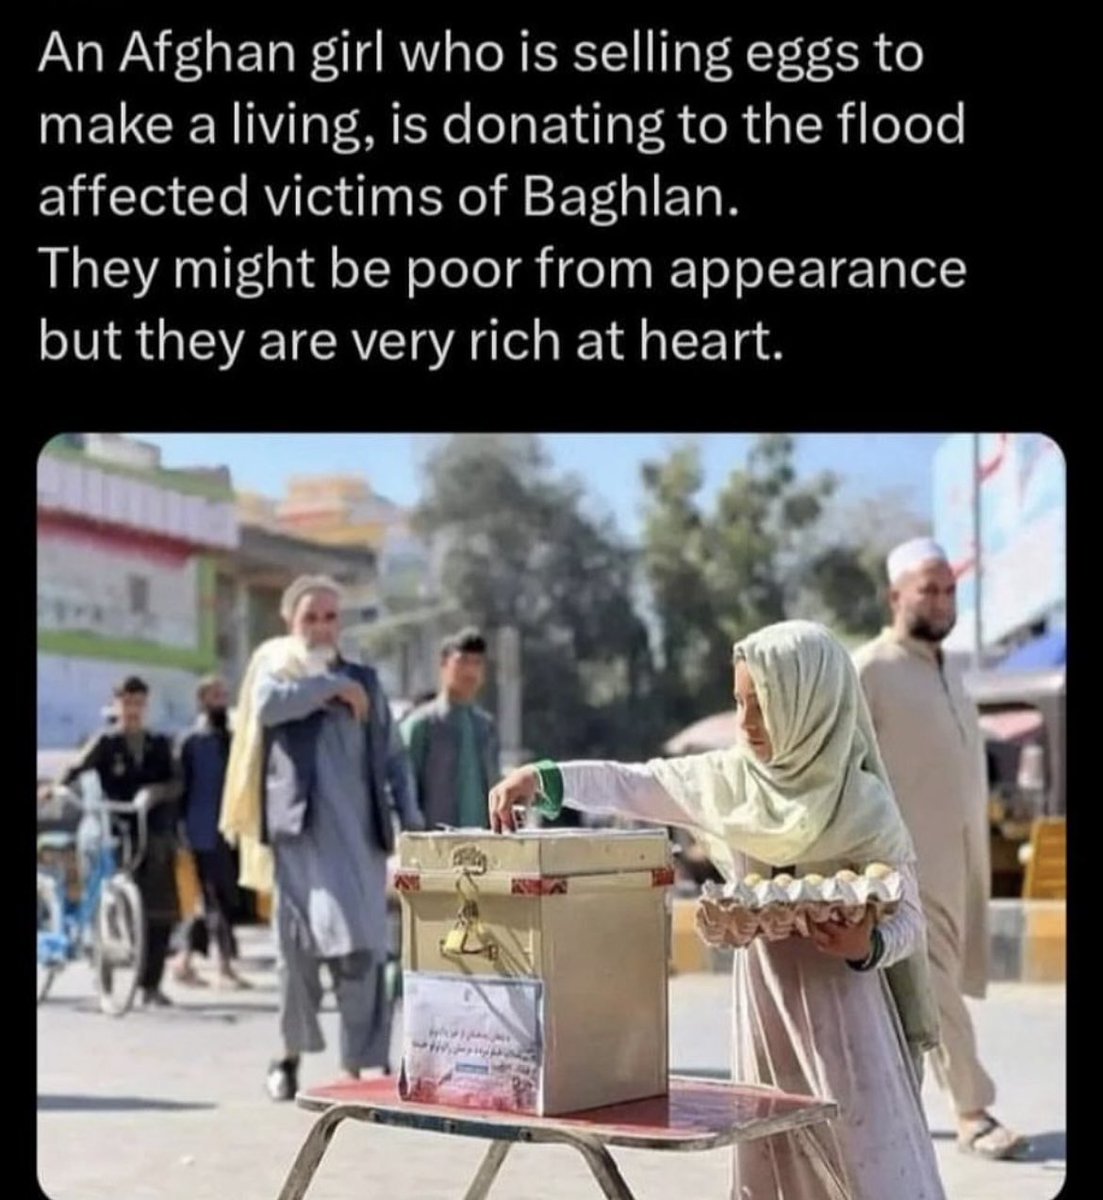 “Every act of kindness is Charity” ~Prophet Mohammad PBUH